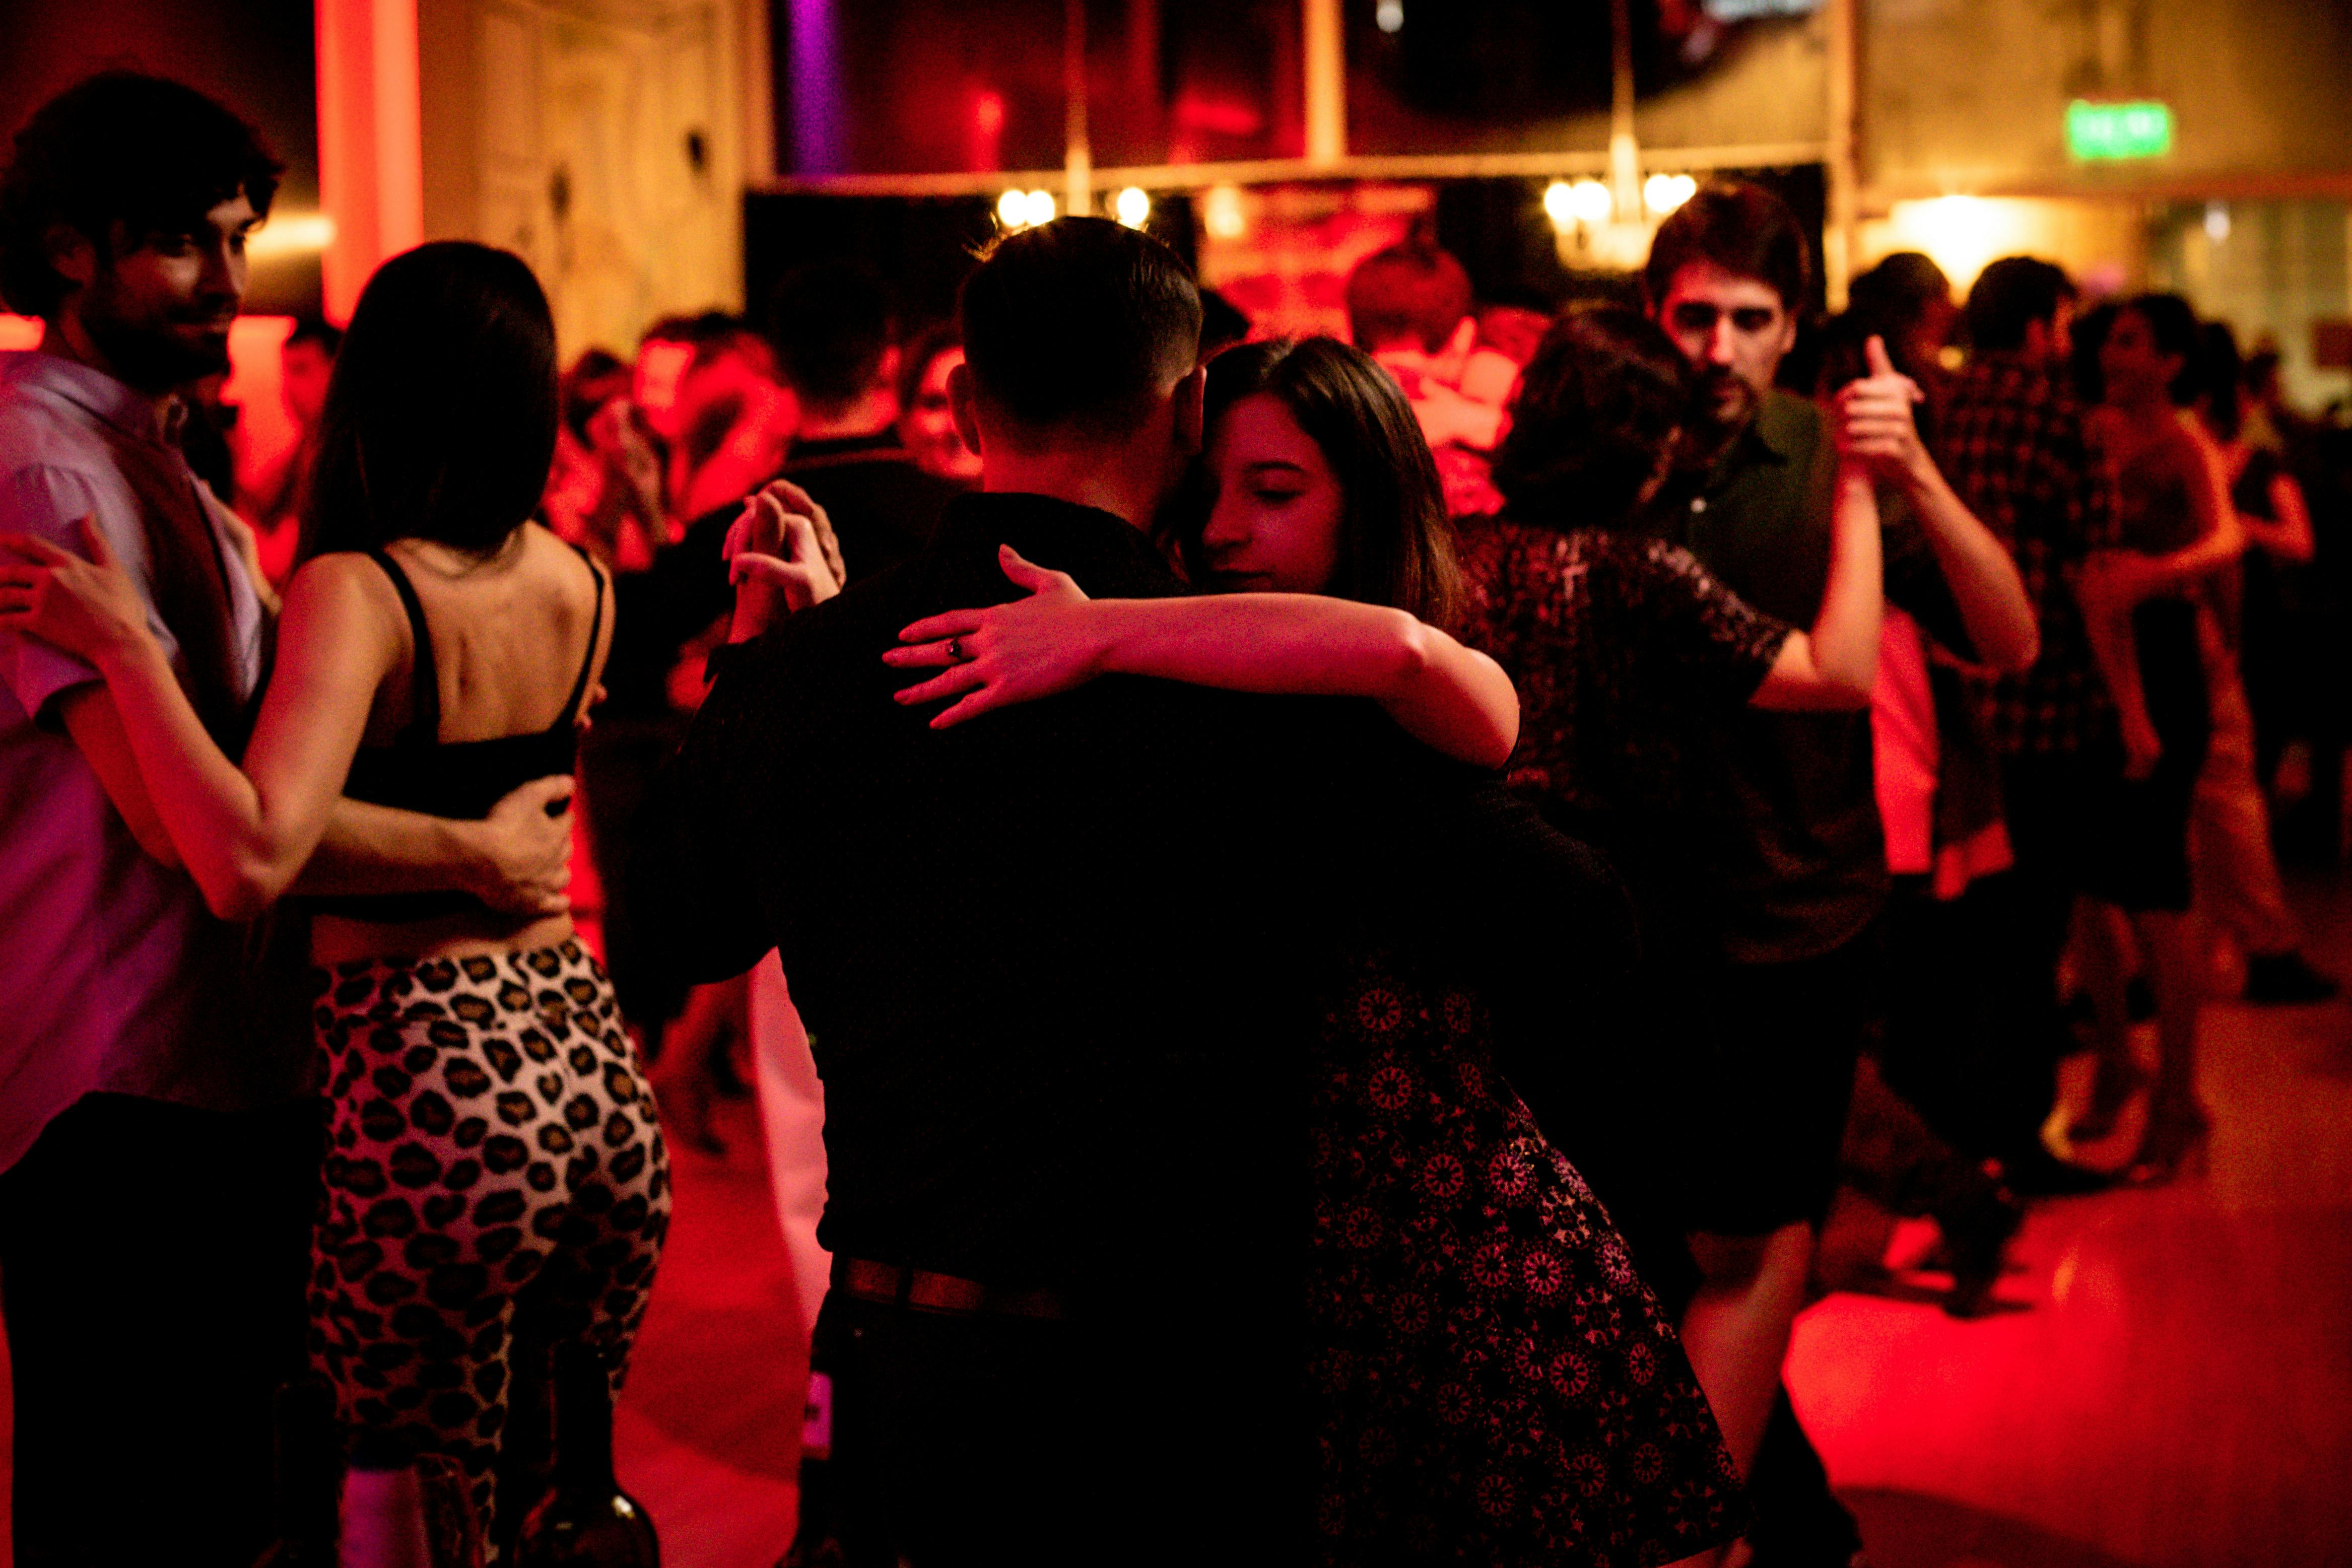 Tango night with locals